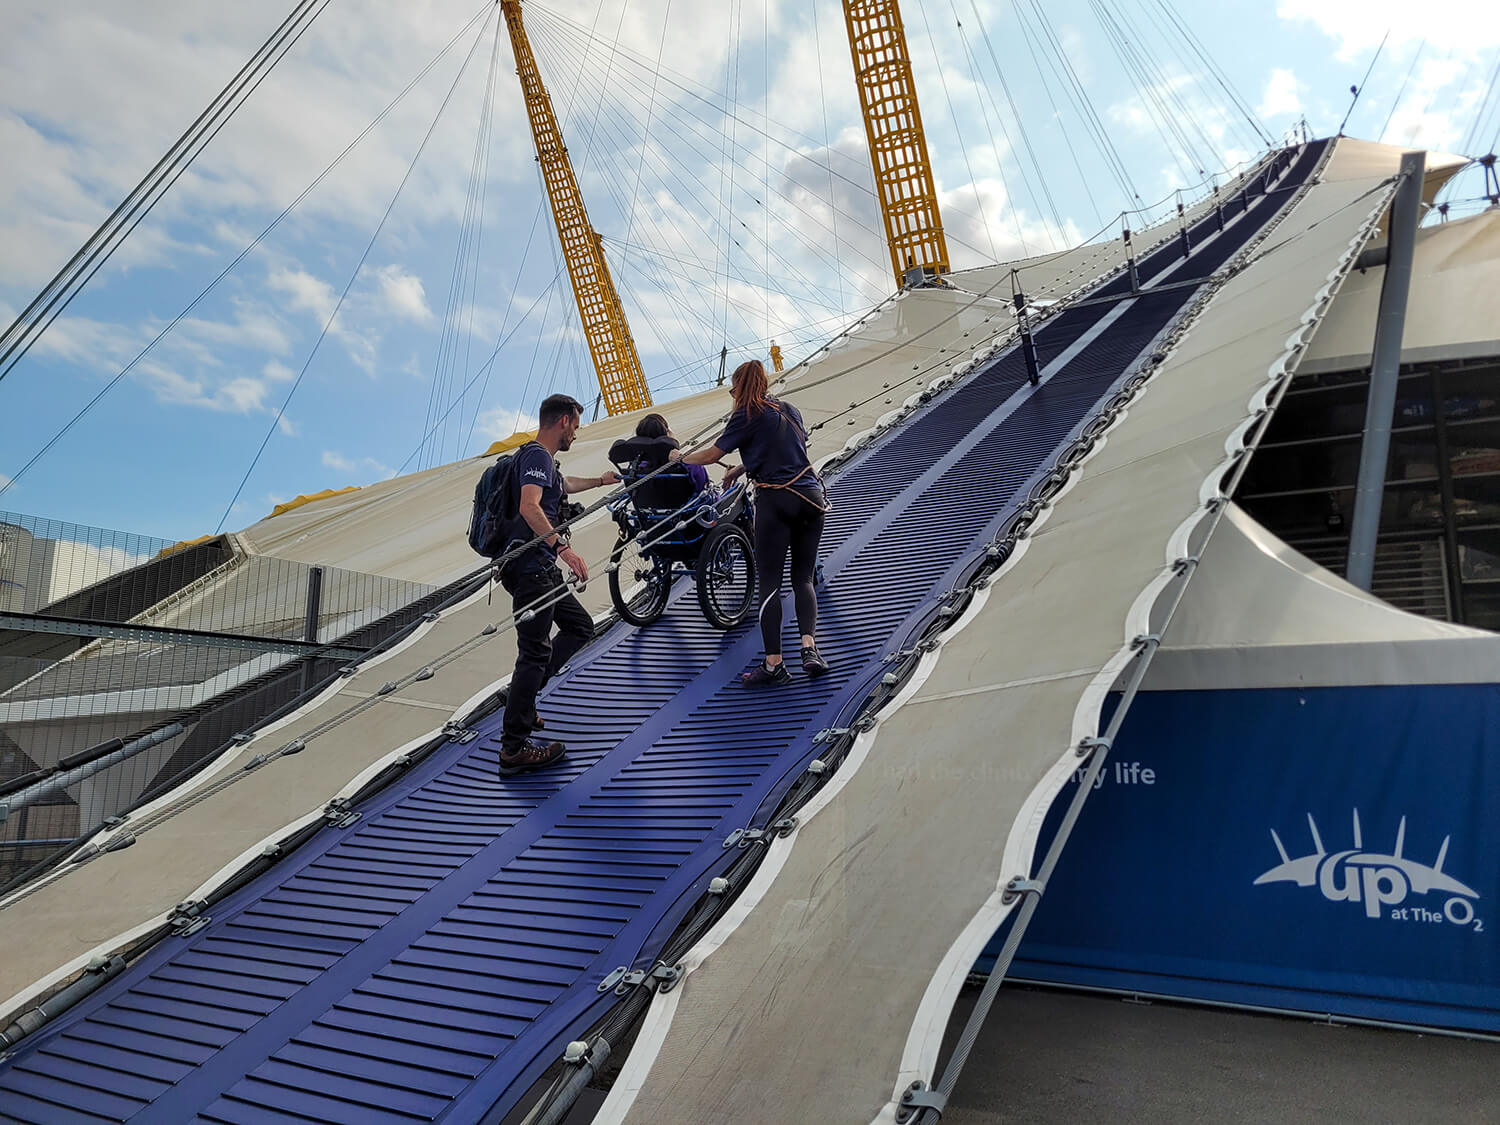 Emma and two climb guides pictured on the walkway of the Up at The O2. The are completing the descent.